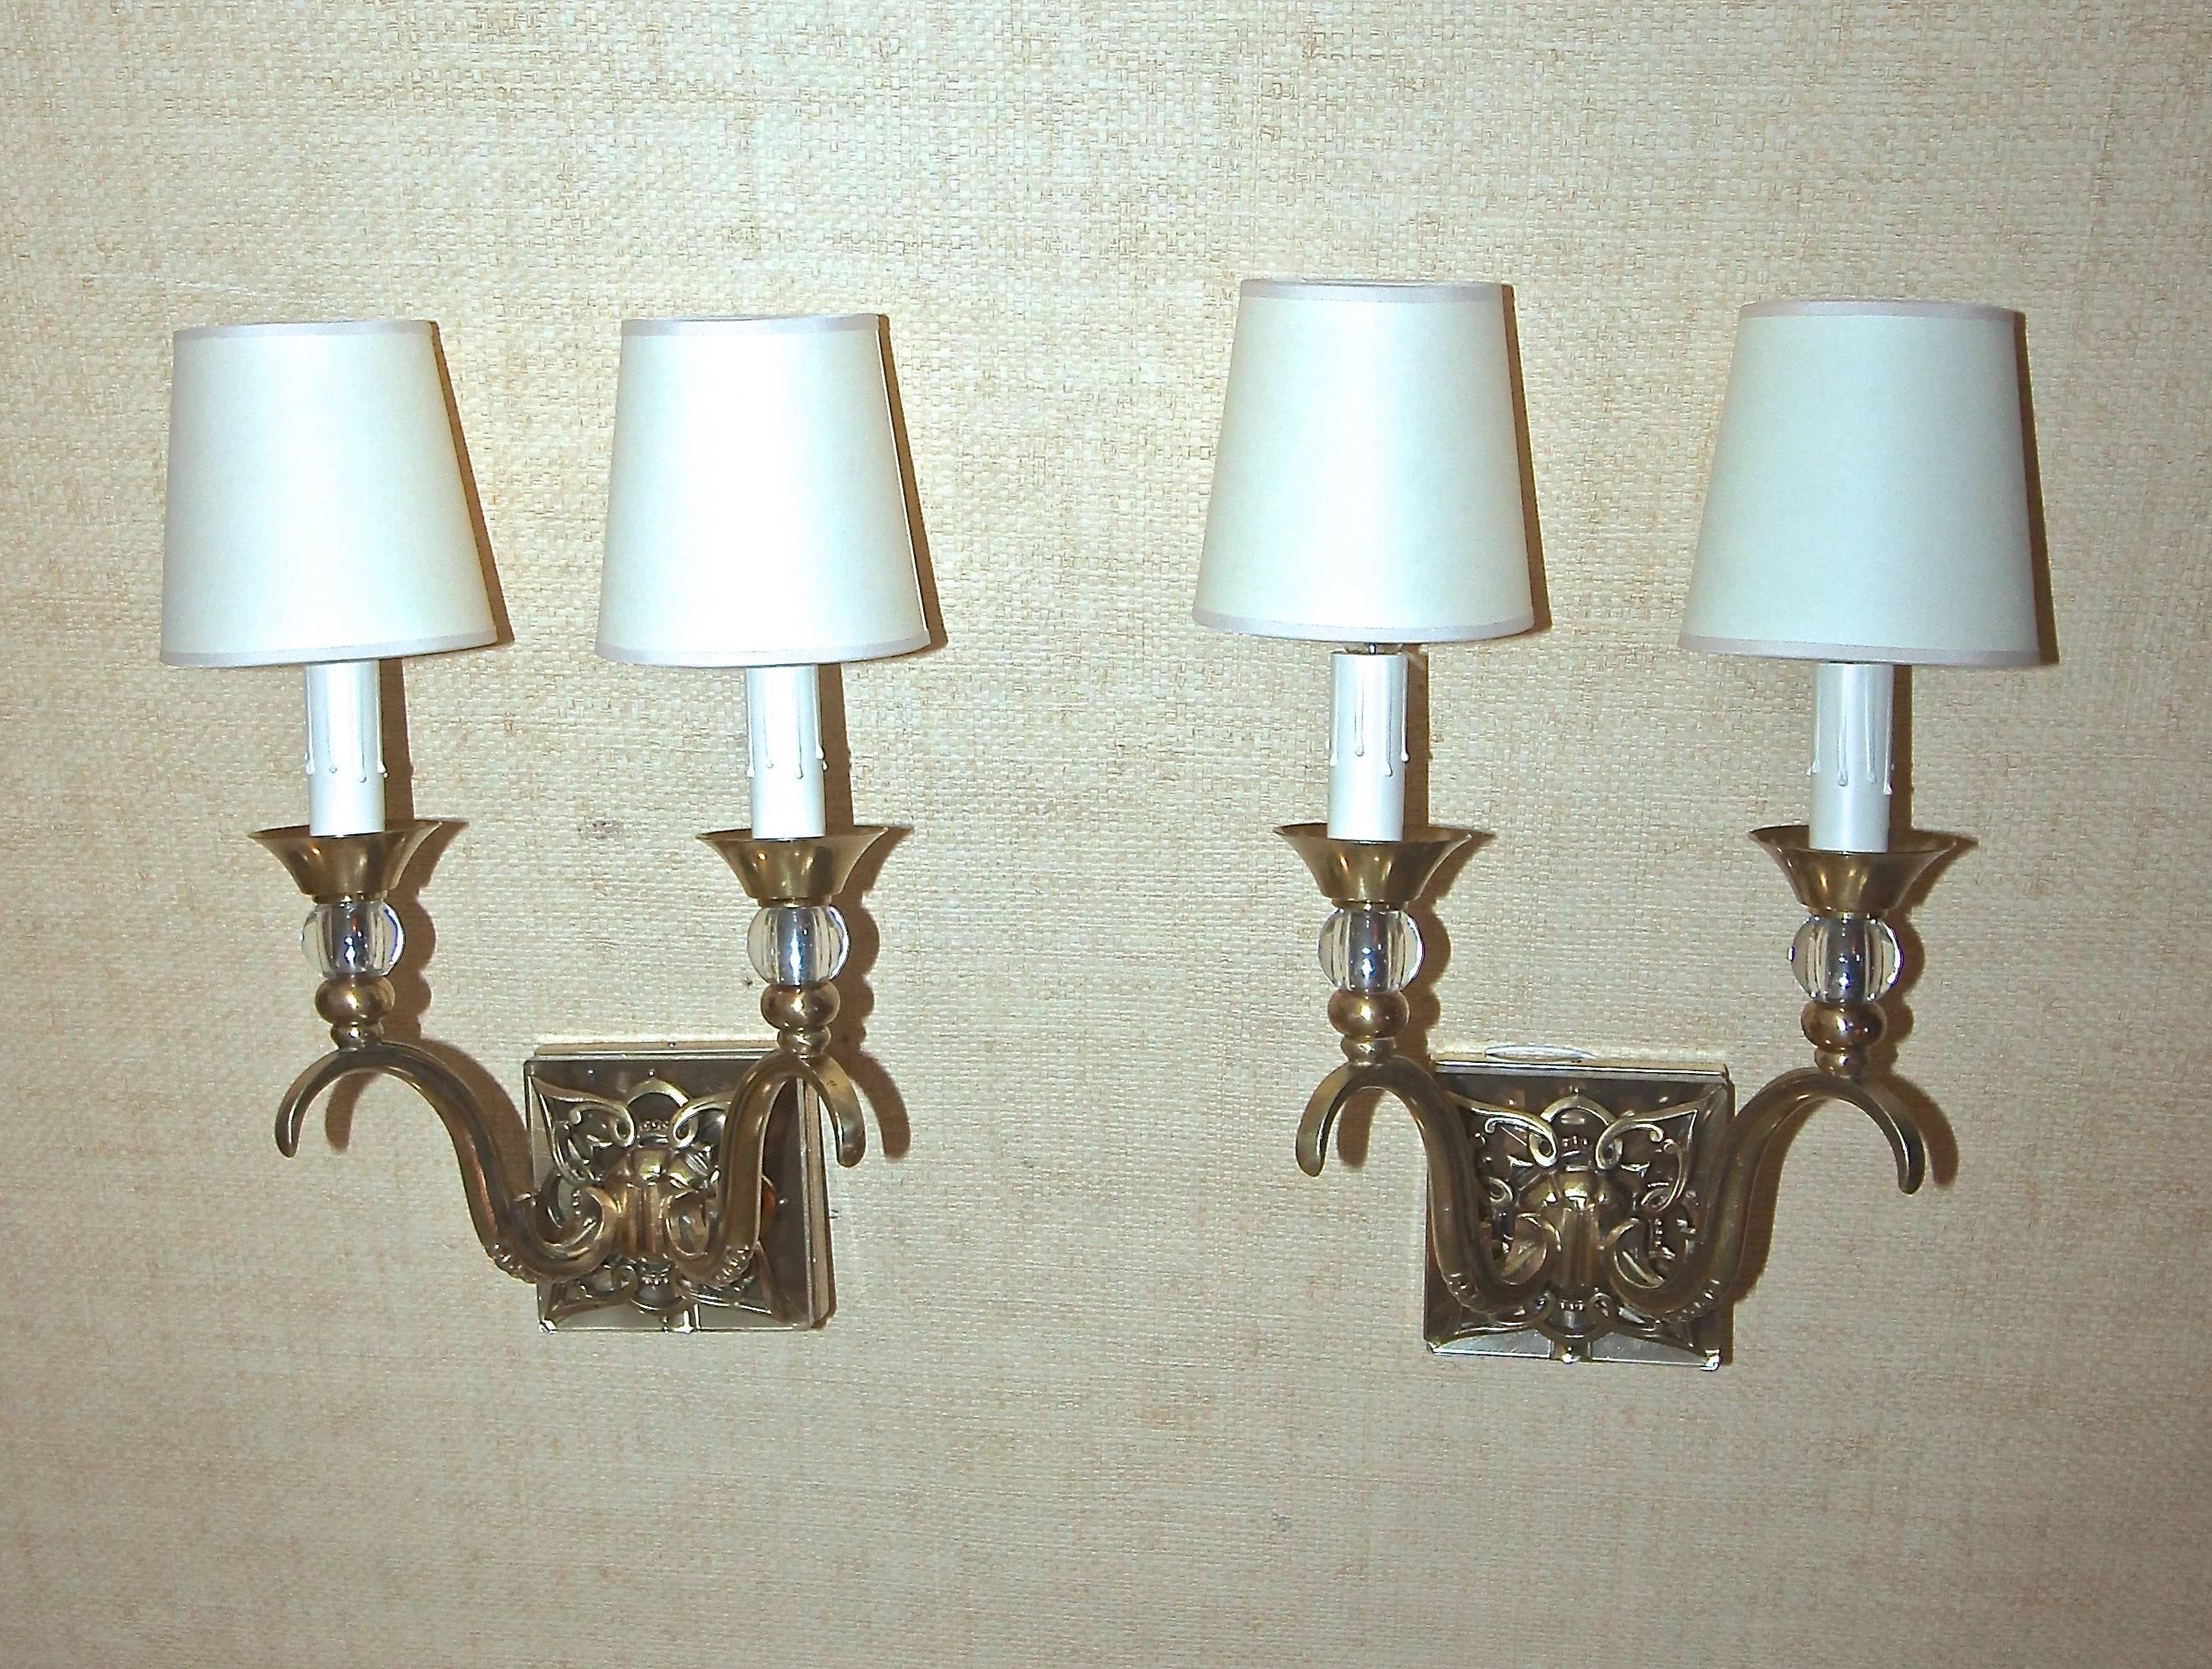 Pair of elegant French two-arm bronze or brass and crystal wall sconces attributed to Jules Leleu. Each sconce uses 2 - 40 watt max candelabra base bulbs, newly wired. Paper shades are included. Overall height with shades 14", without shades